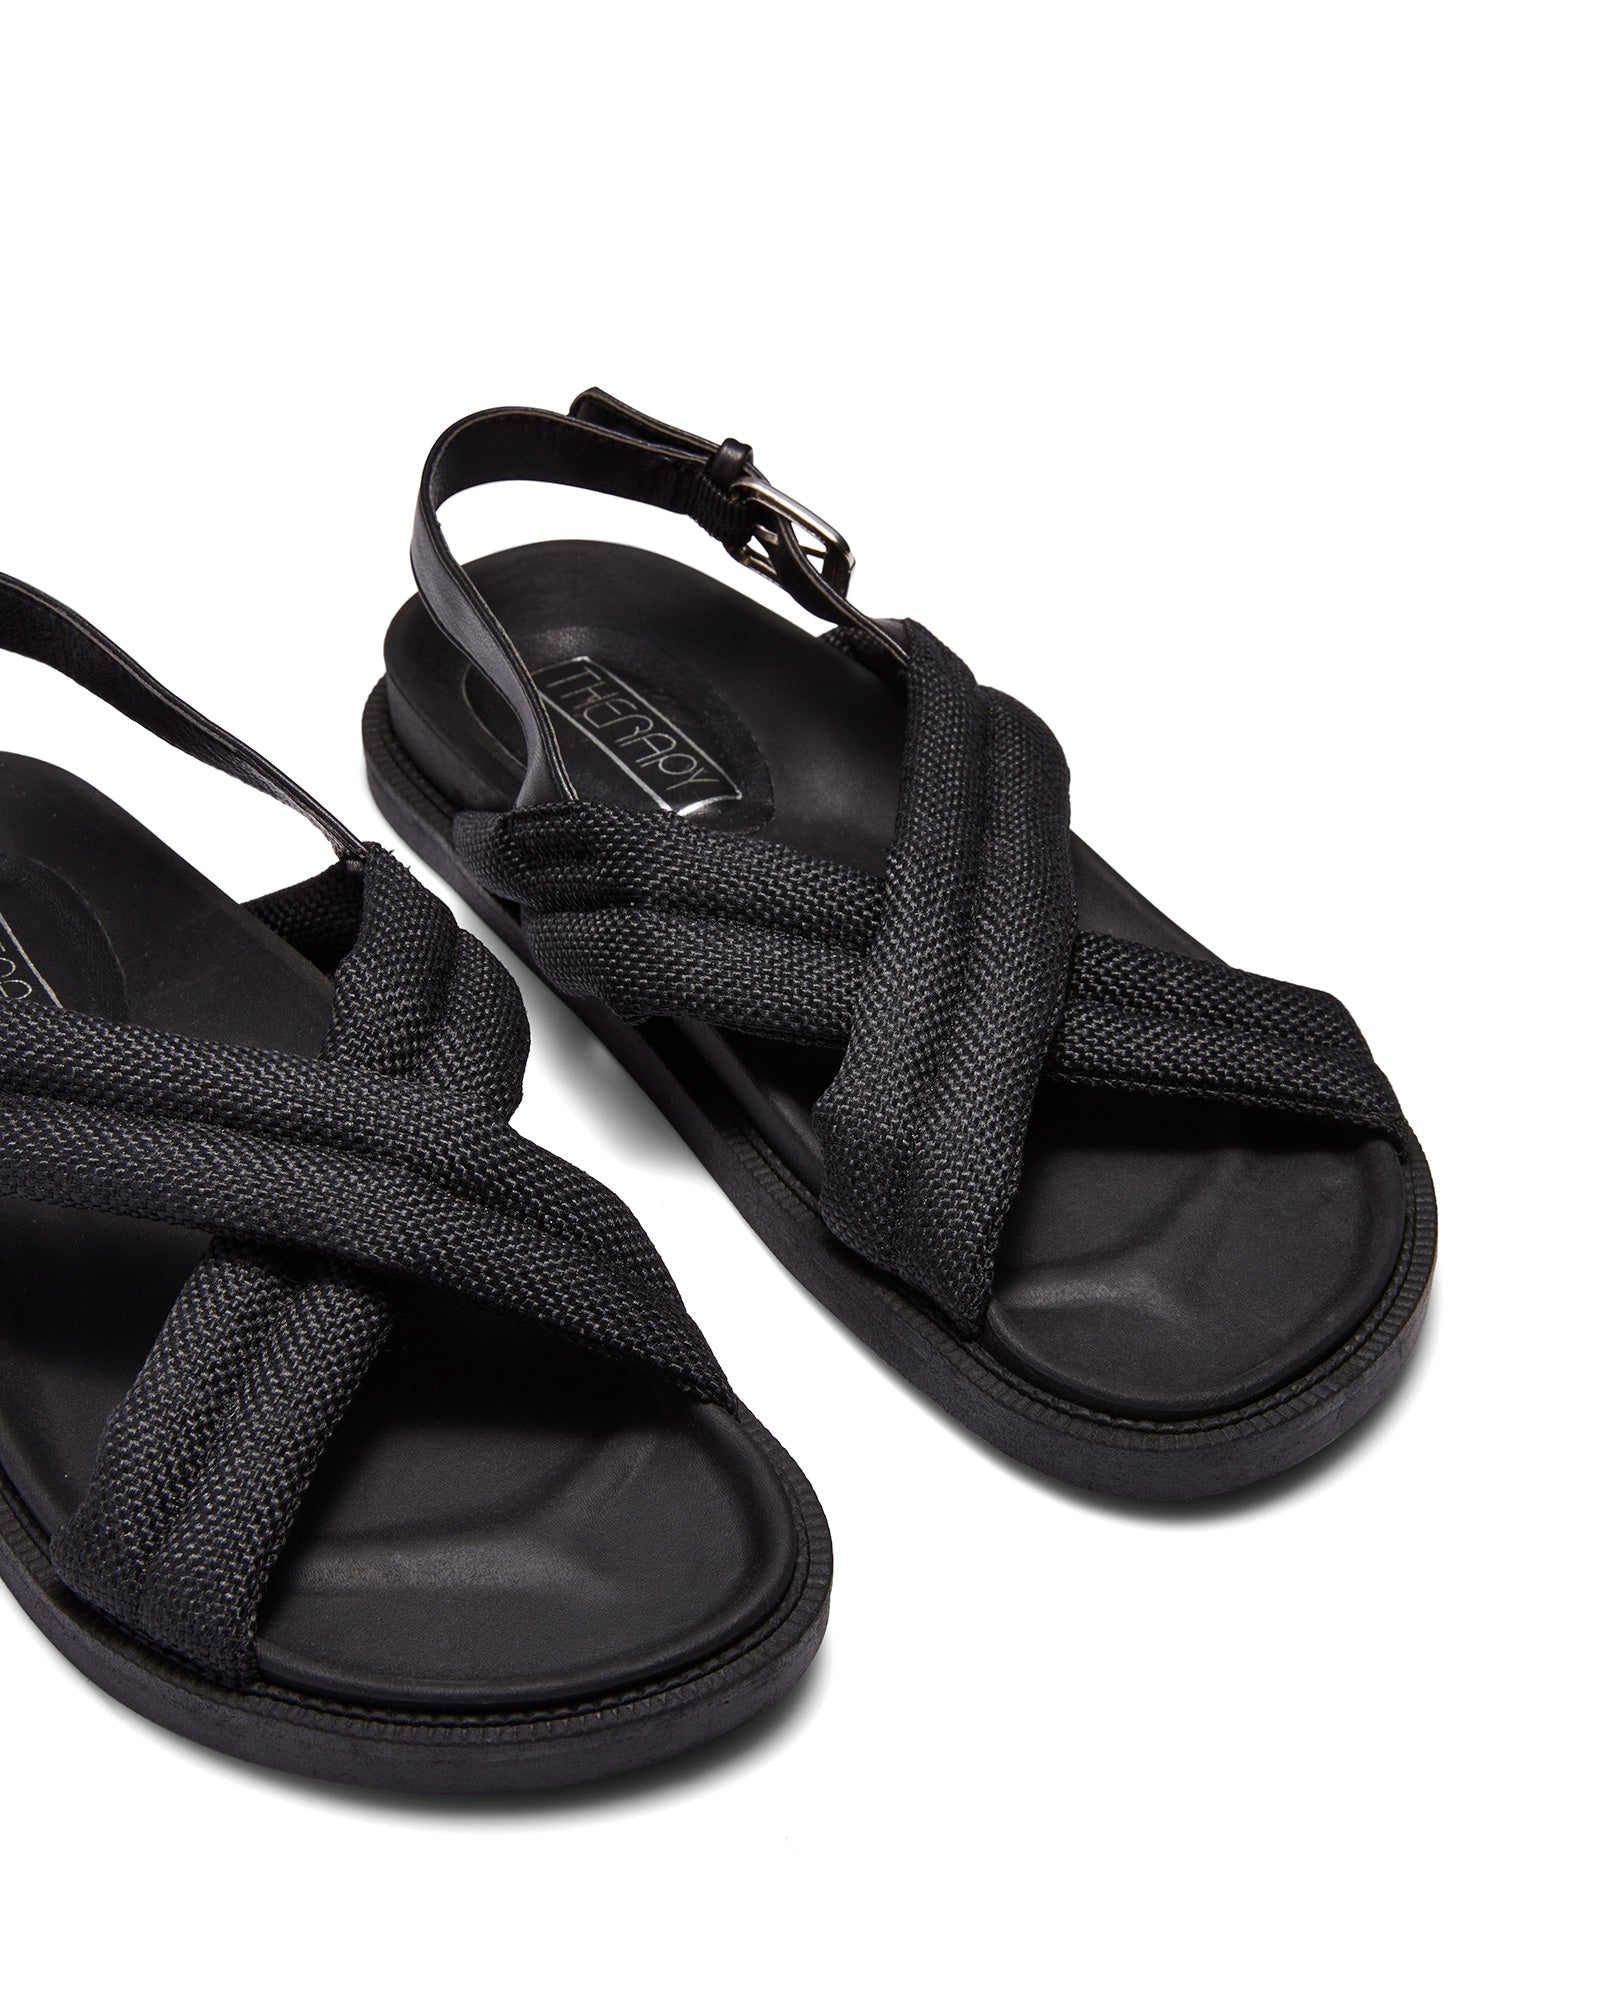 Therapy Shoes Aleesha Black | Women's Sandals | Flatform | Footbed